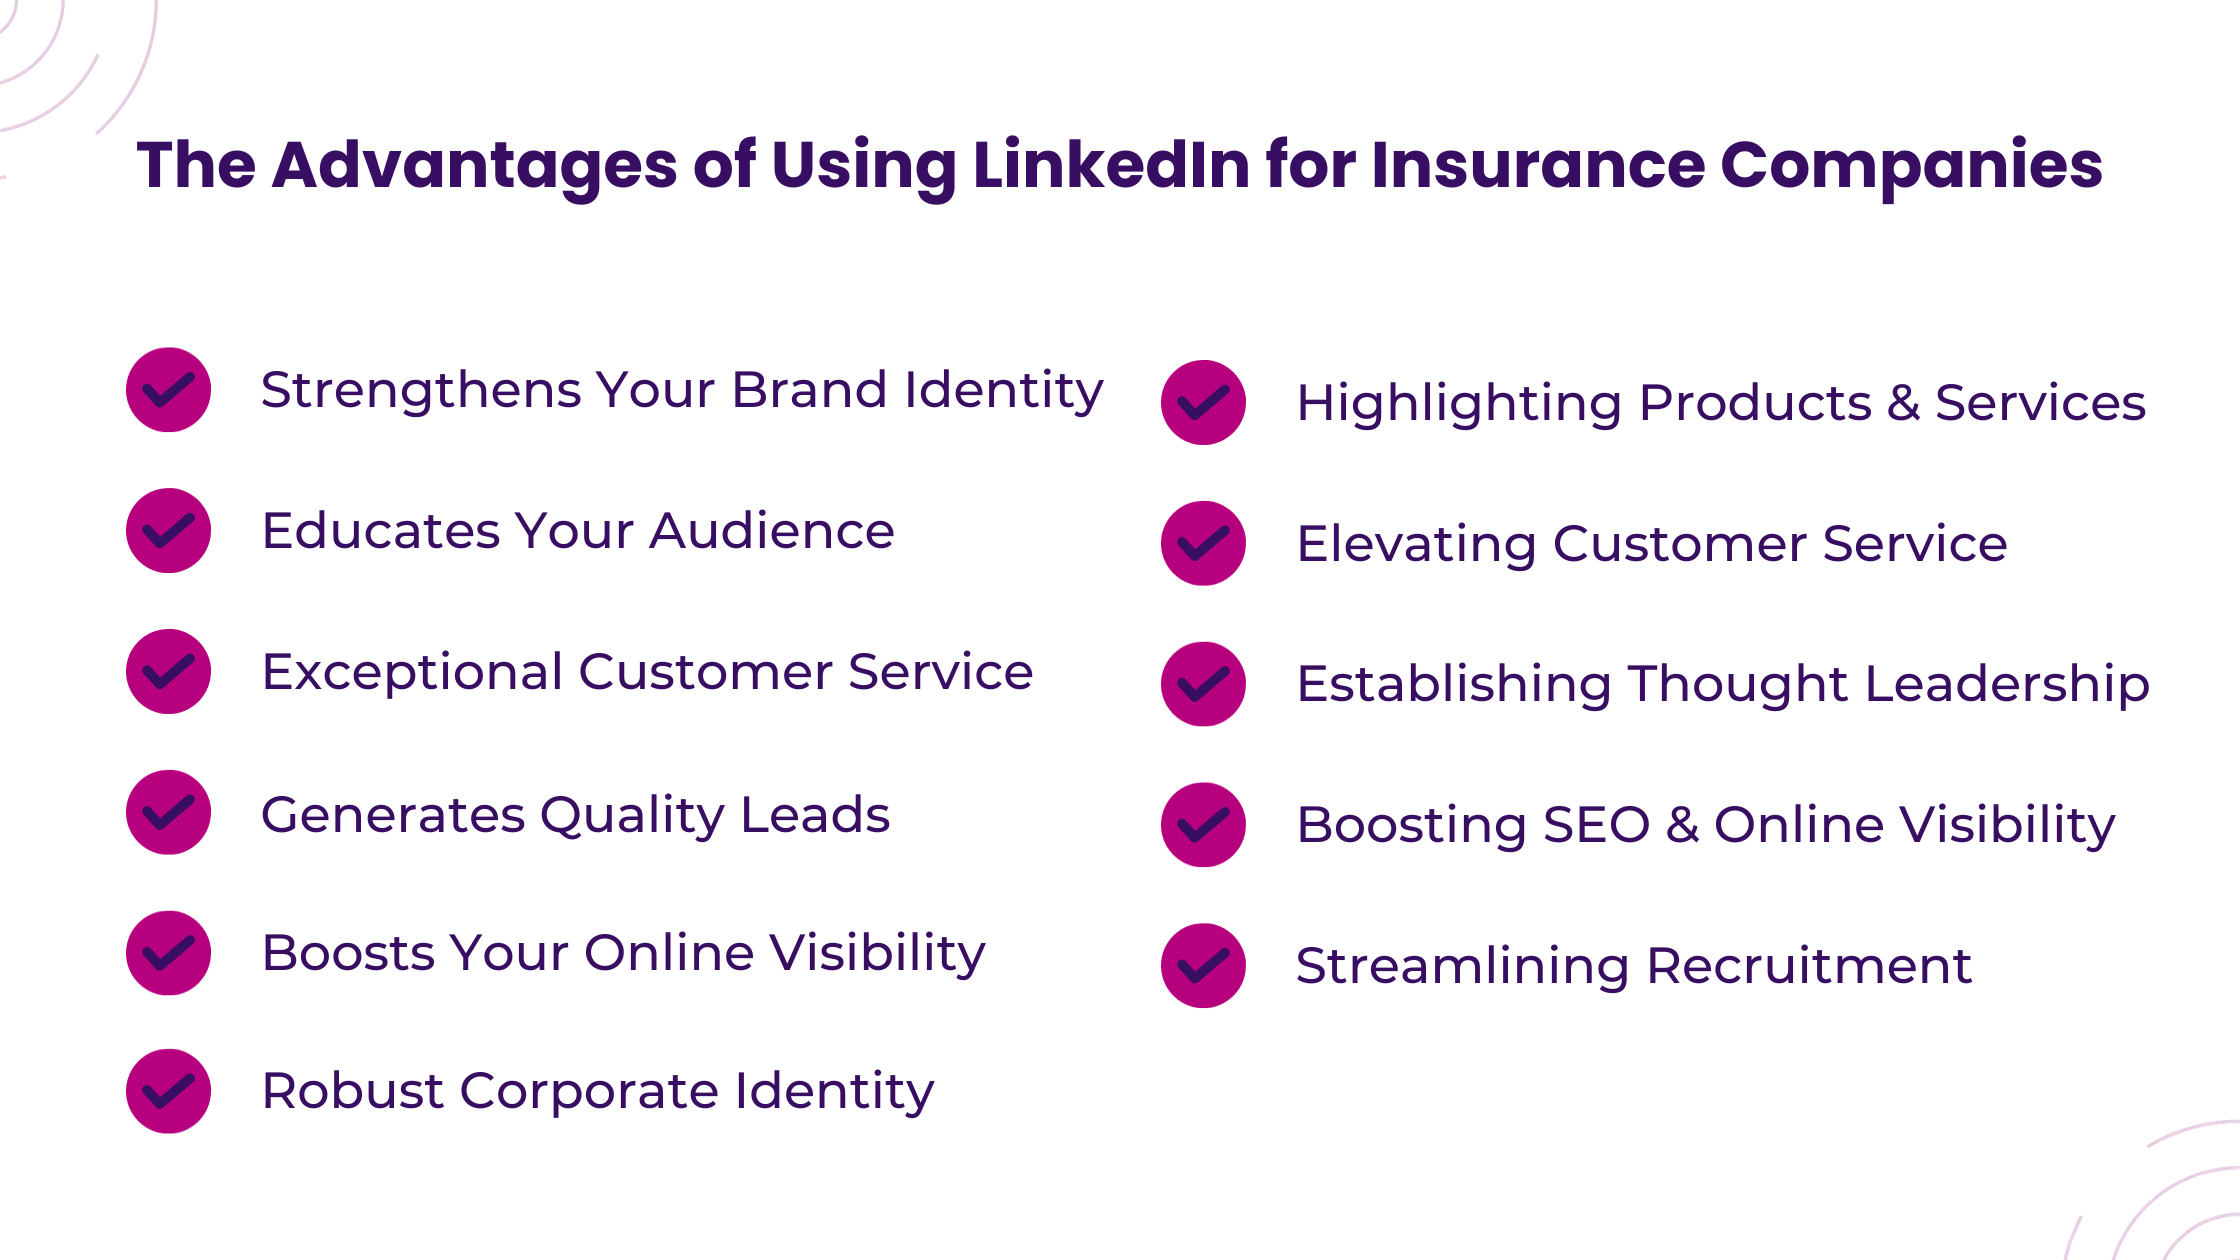 The Advantages of Using LinkedIn for Insurance Companies